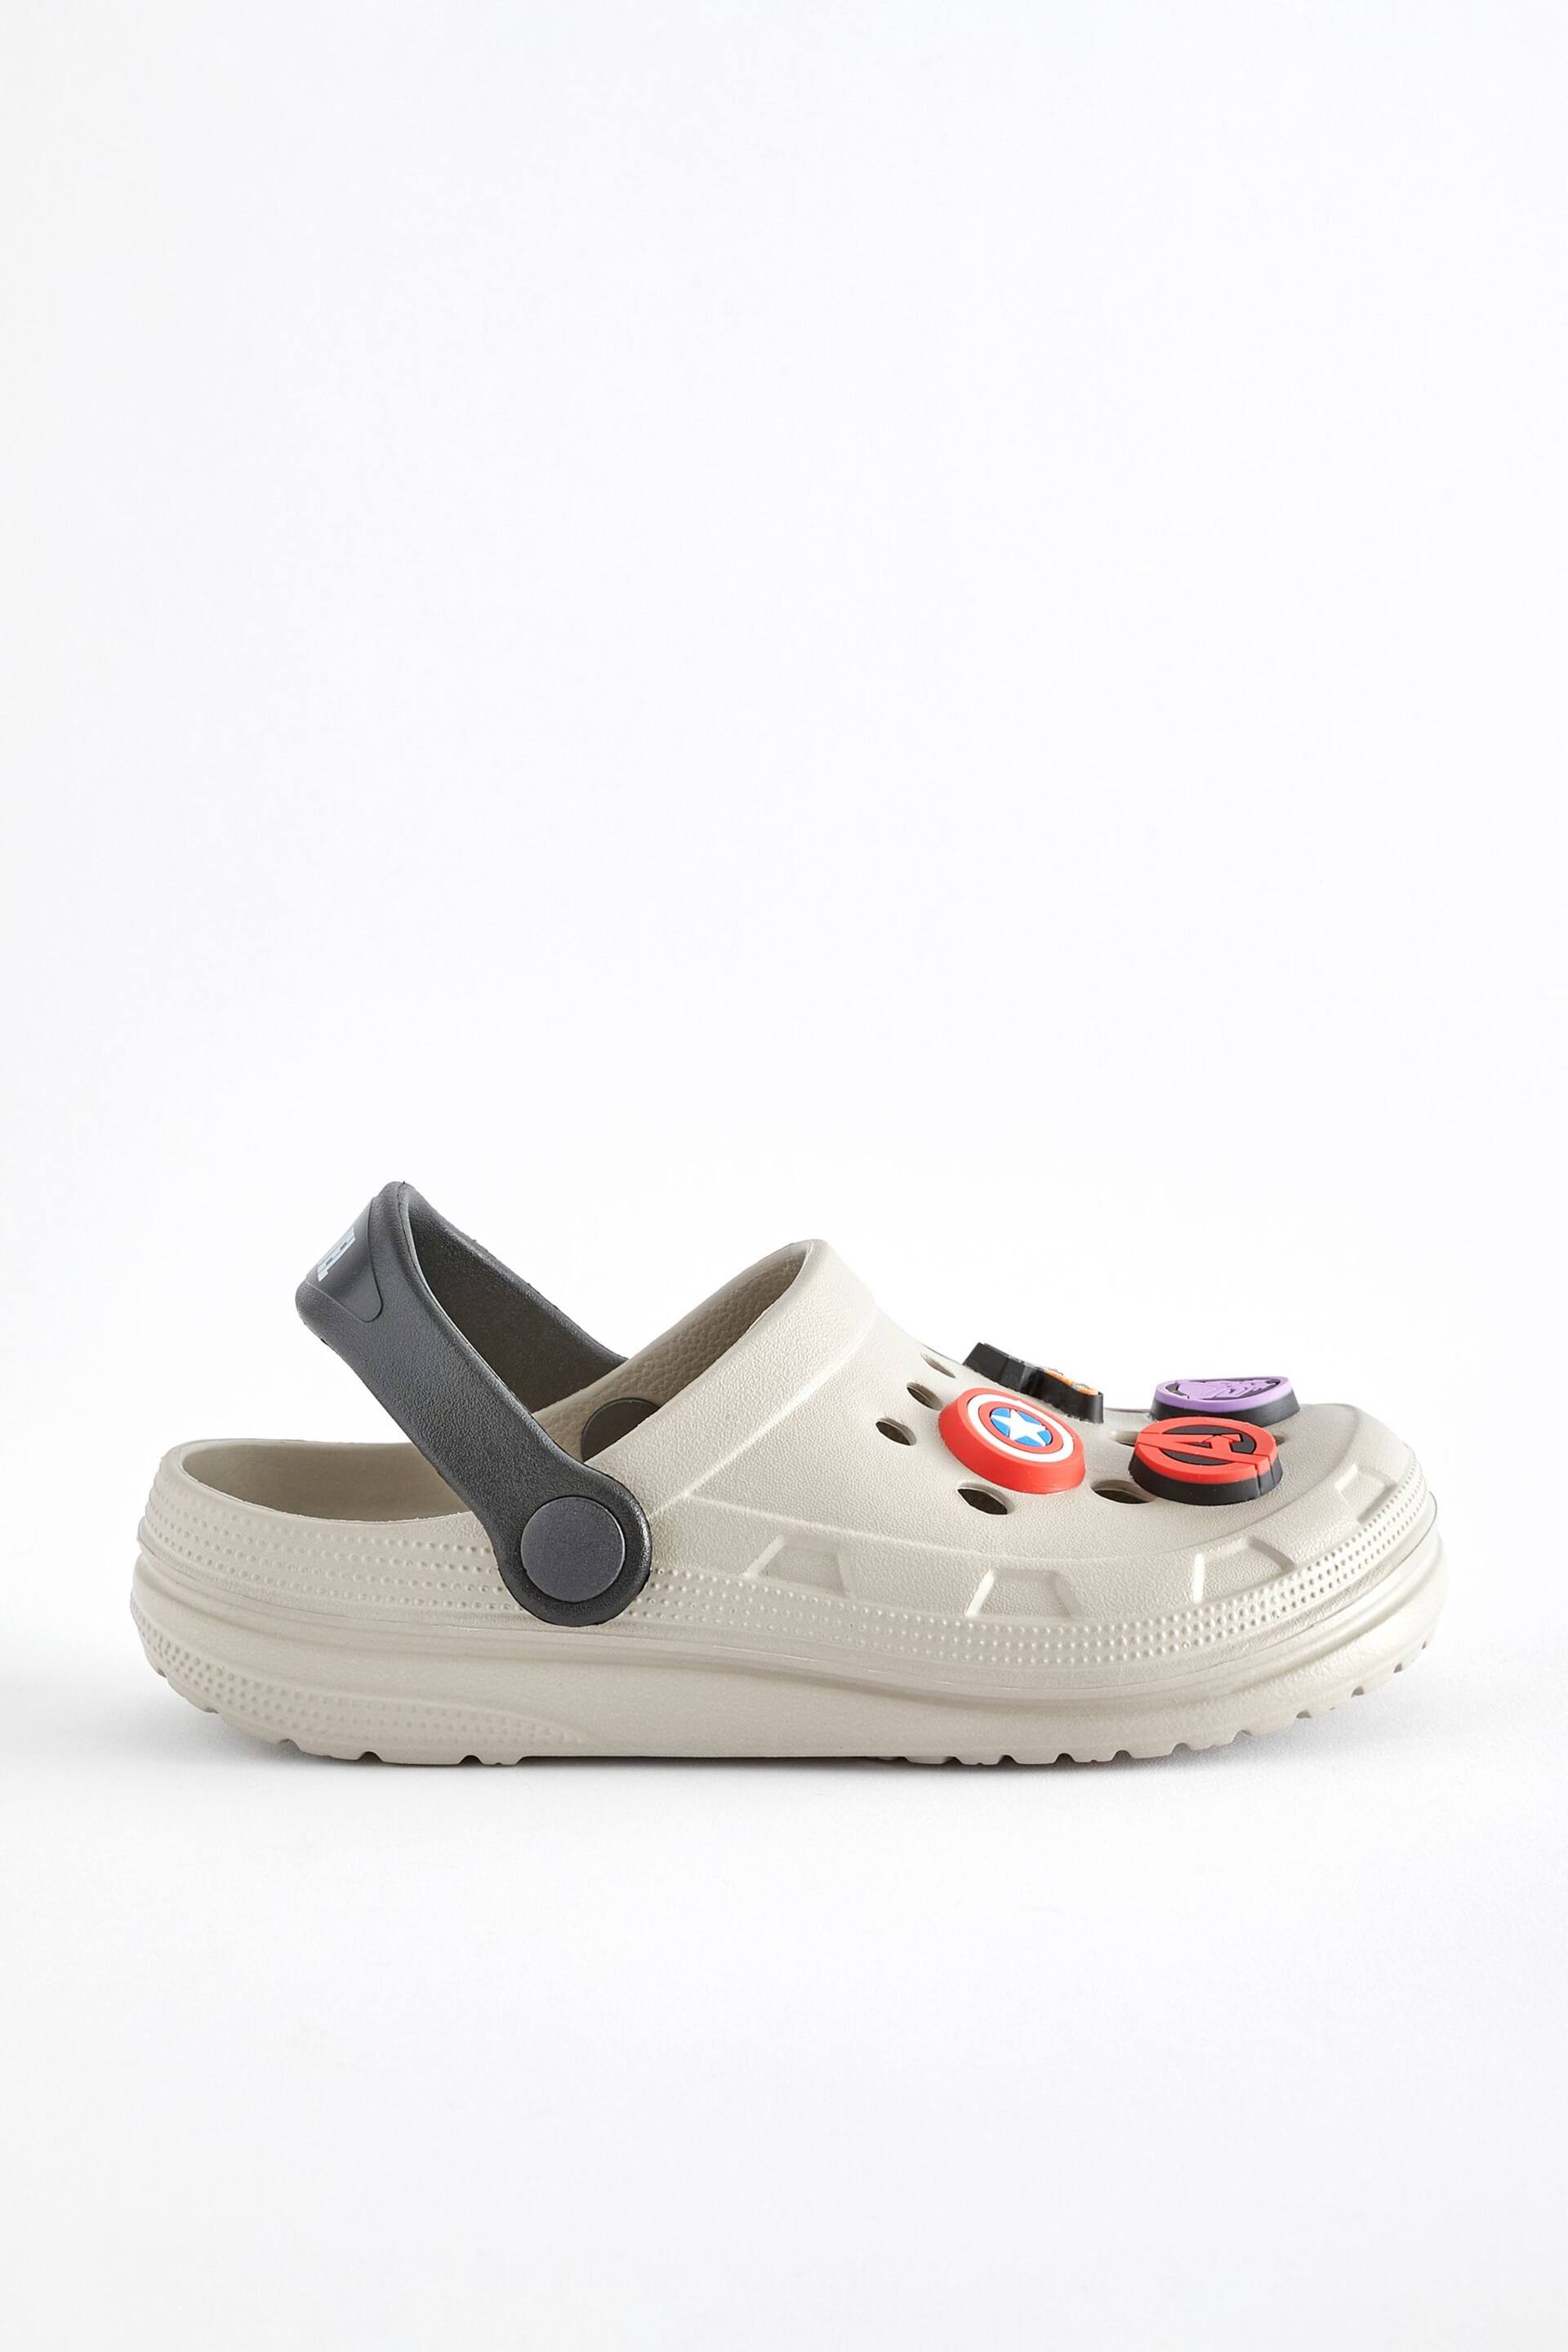 Neutral Marvel Clogs - Image 2 of 5